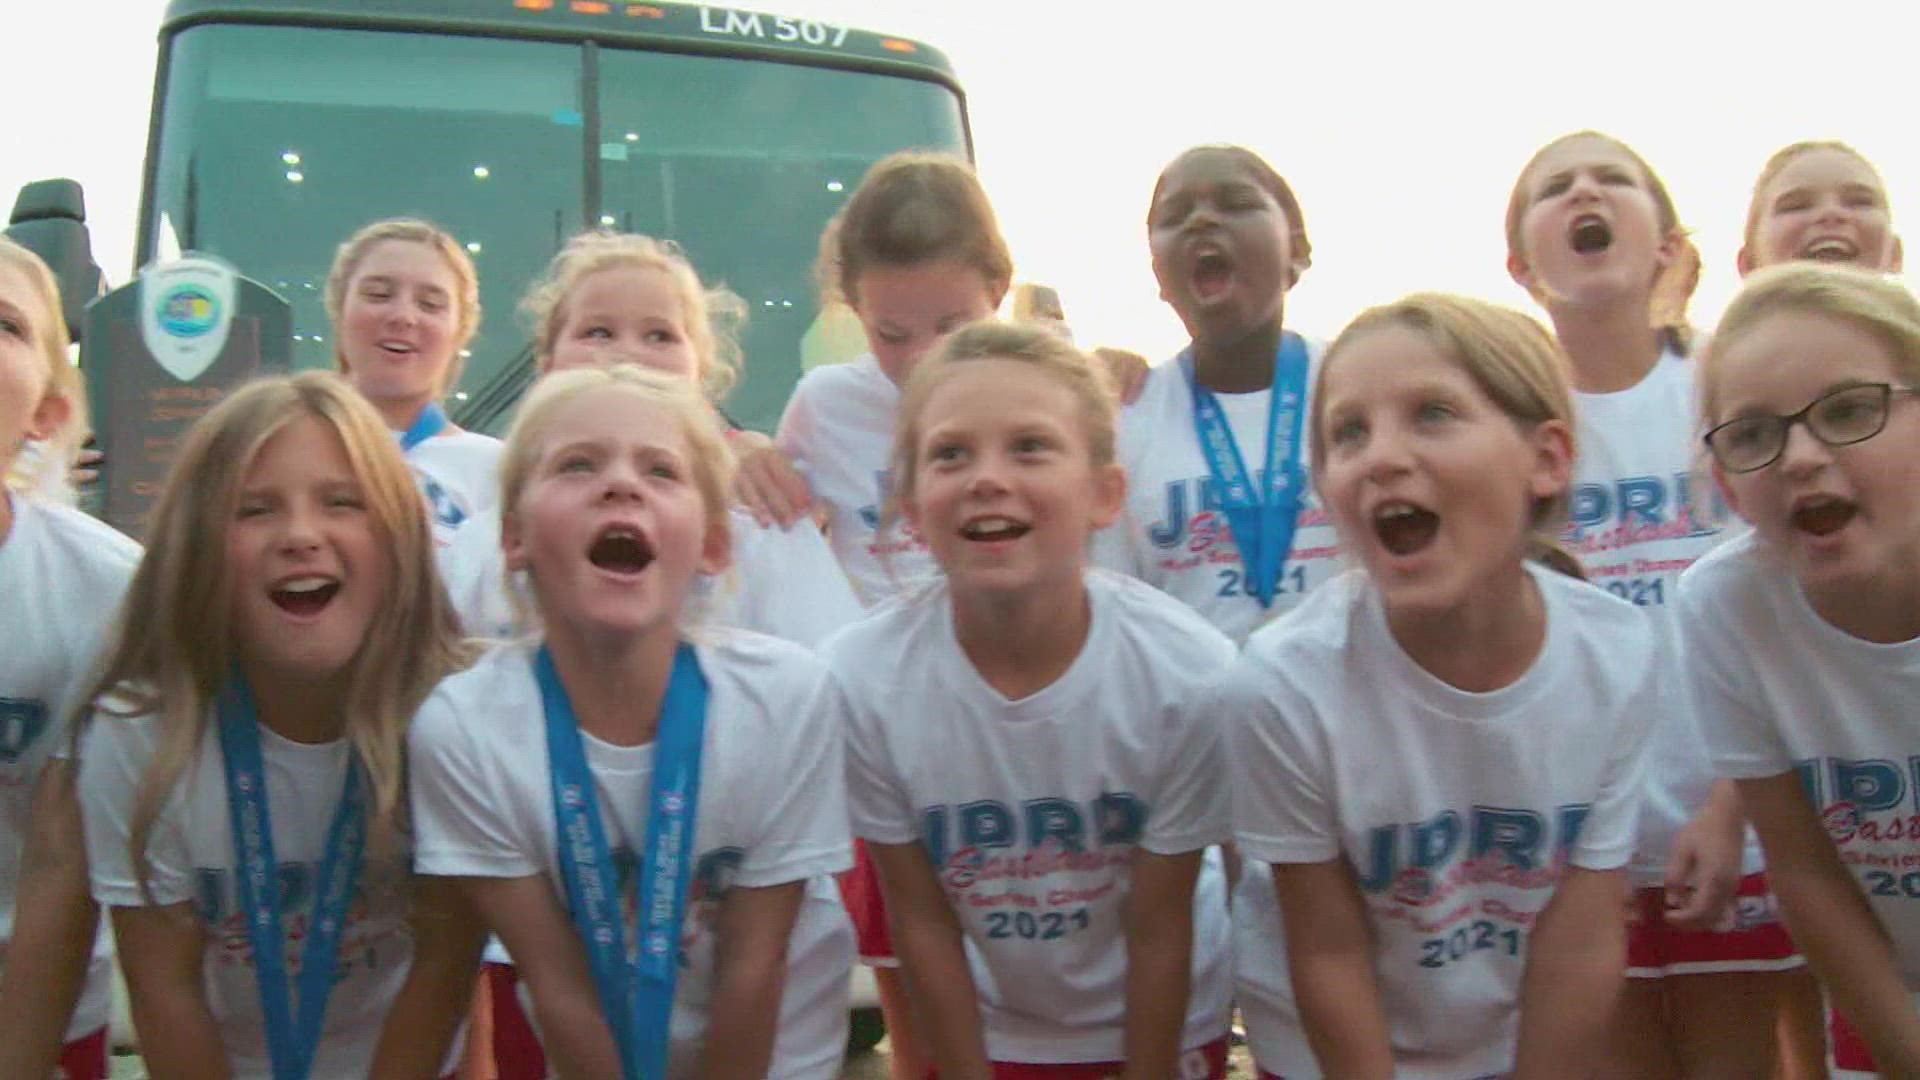 The JPRD "8 and under" girls softball team arrived home Thursday after winning the Babe Ruth World Series Wednesday in Florida.